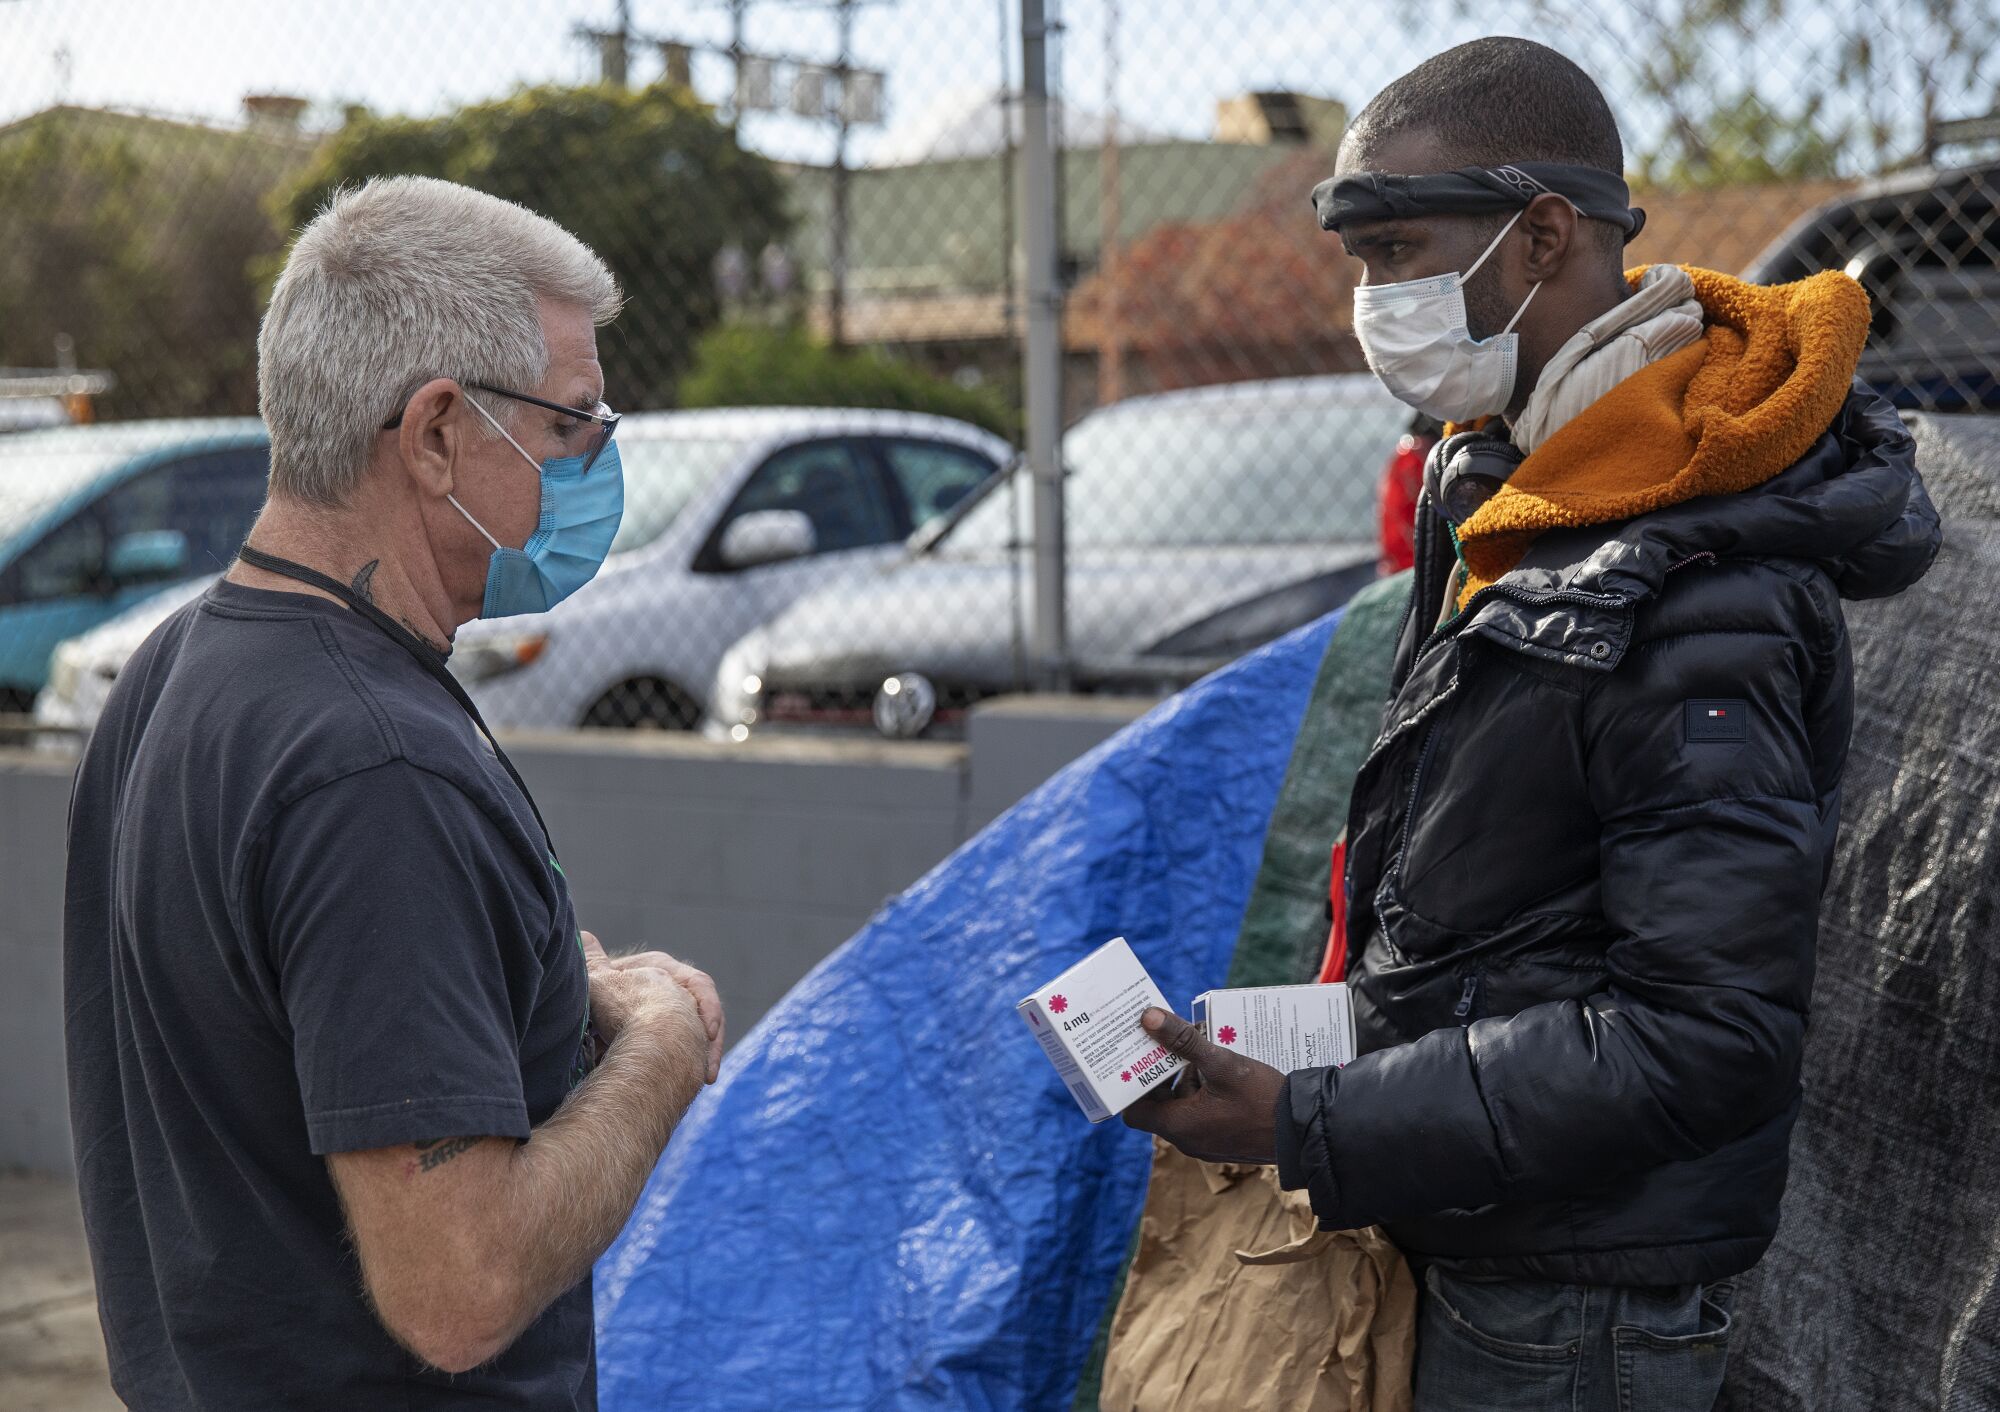 Jason Sodenkamp delivers supplies to Yatorion Jackson at a homeless encampment.